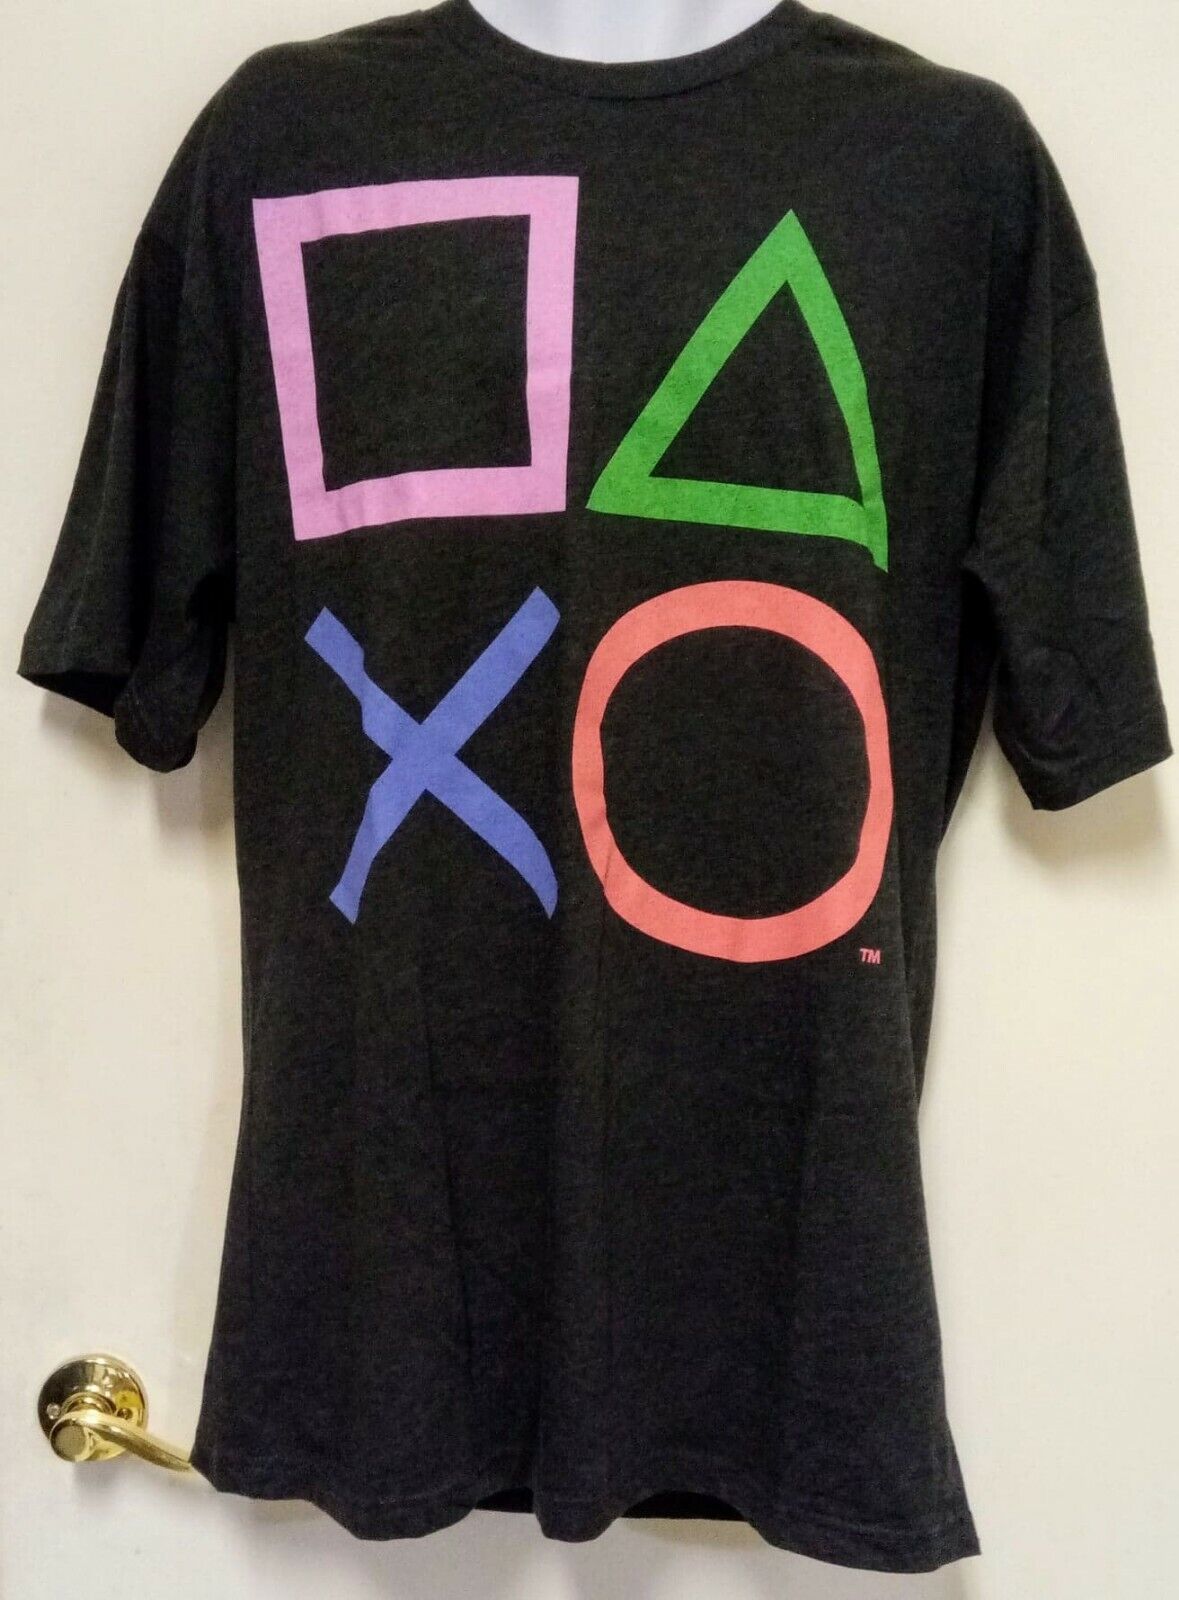 T-Shirt size LT - PS PlayStation Button - Official Licensed Product